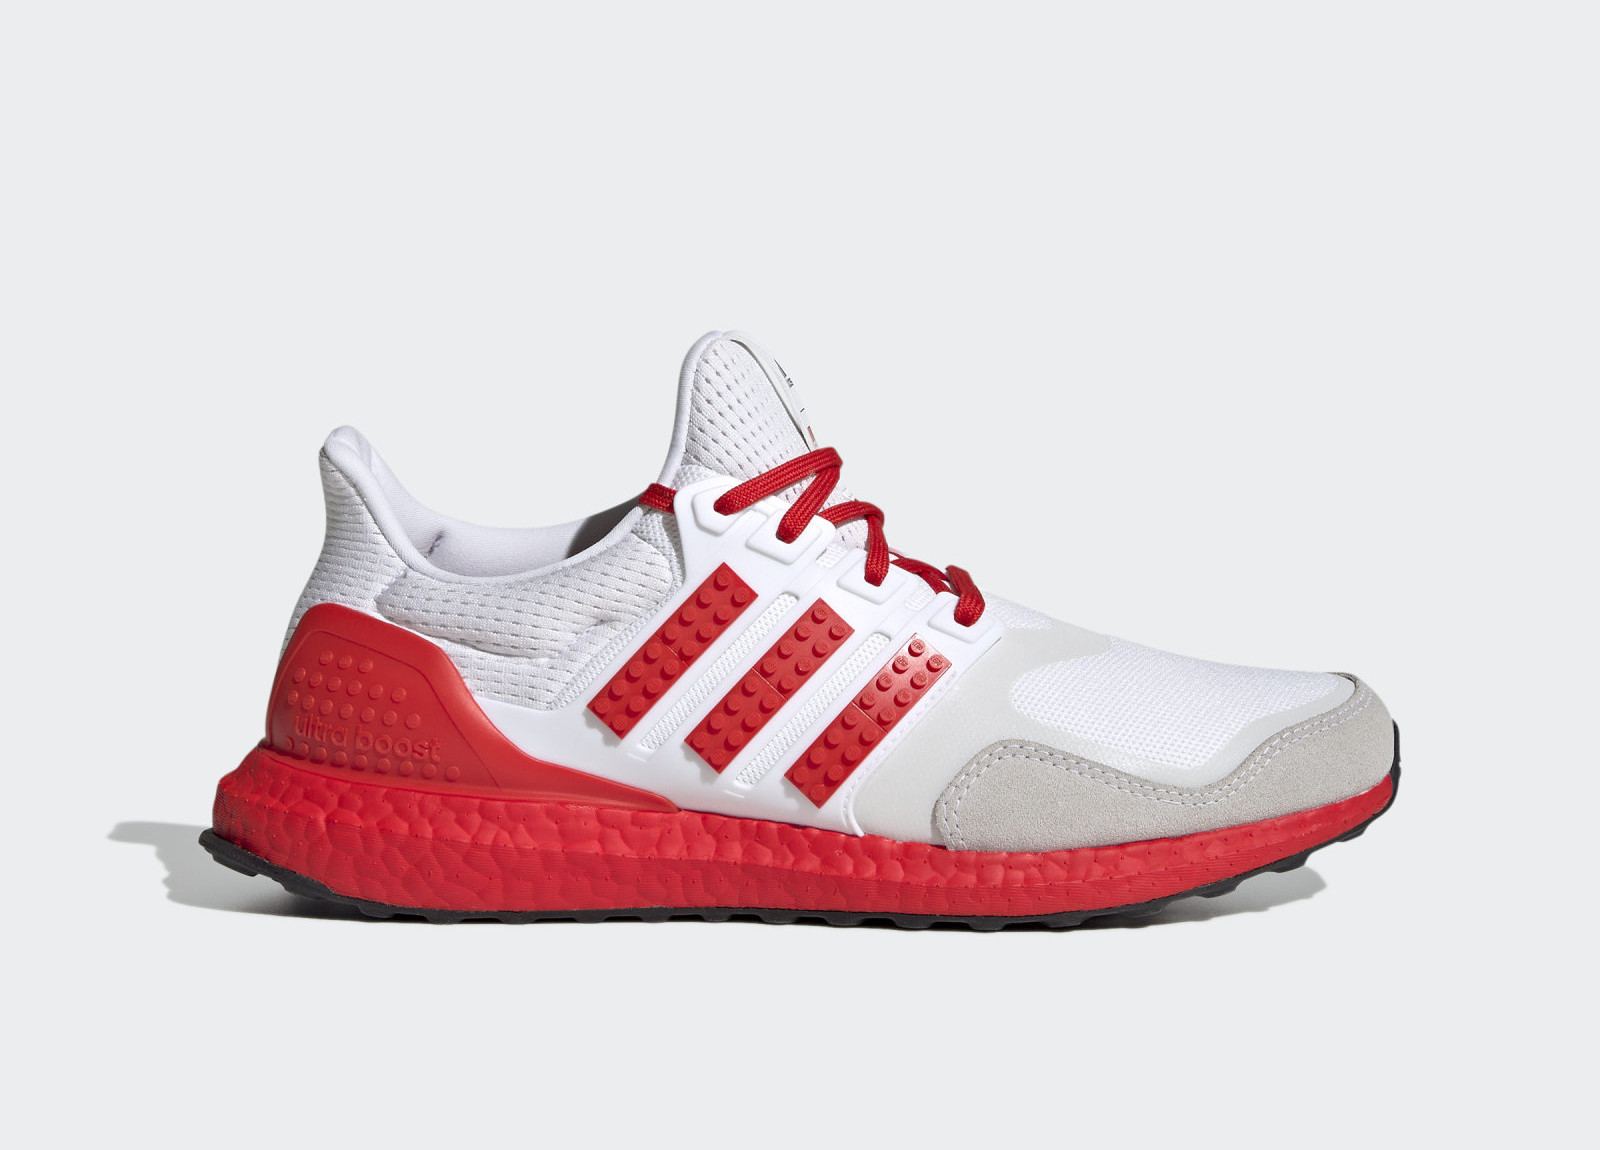 LEGO x Adidas
Ultra Boost DNA
White / Red